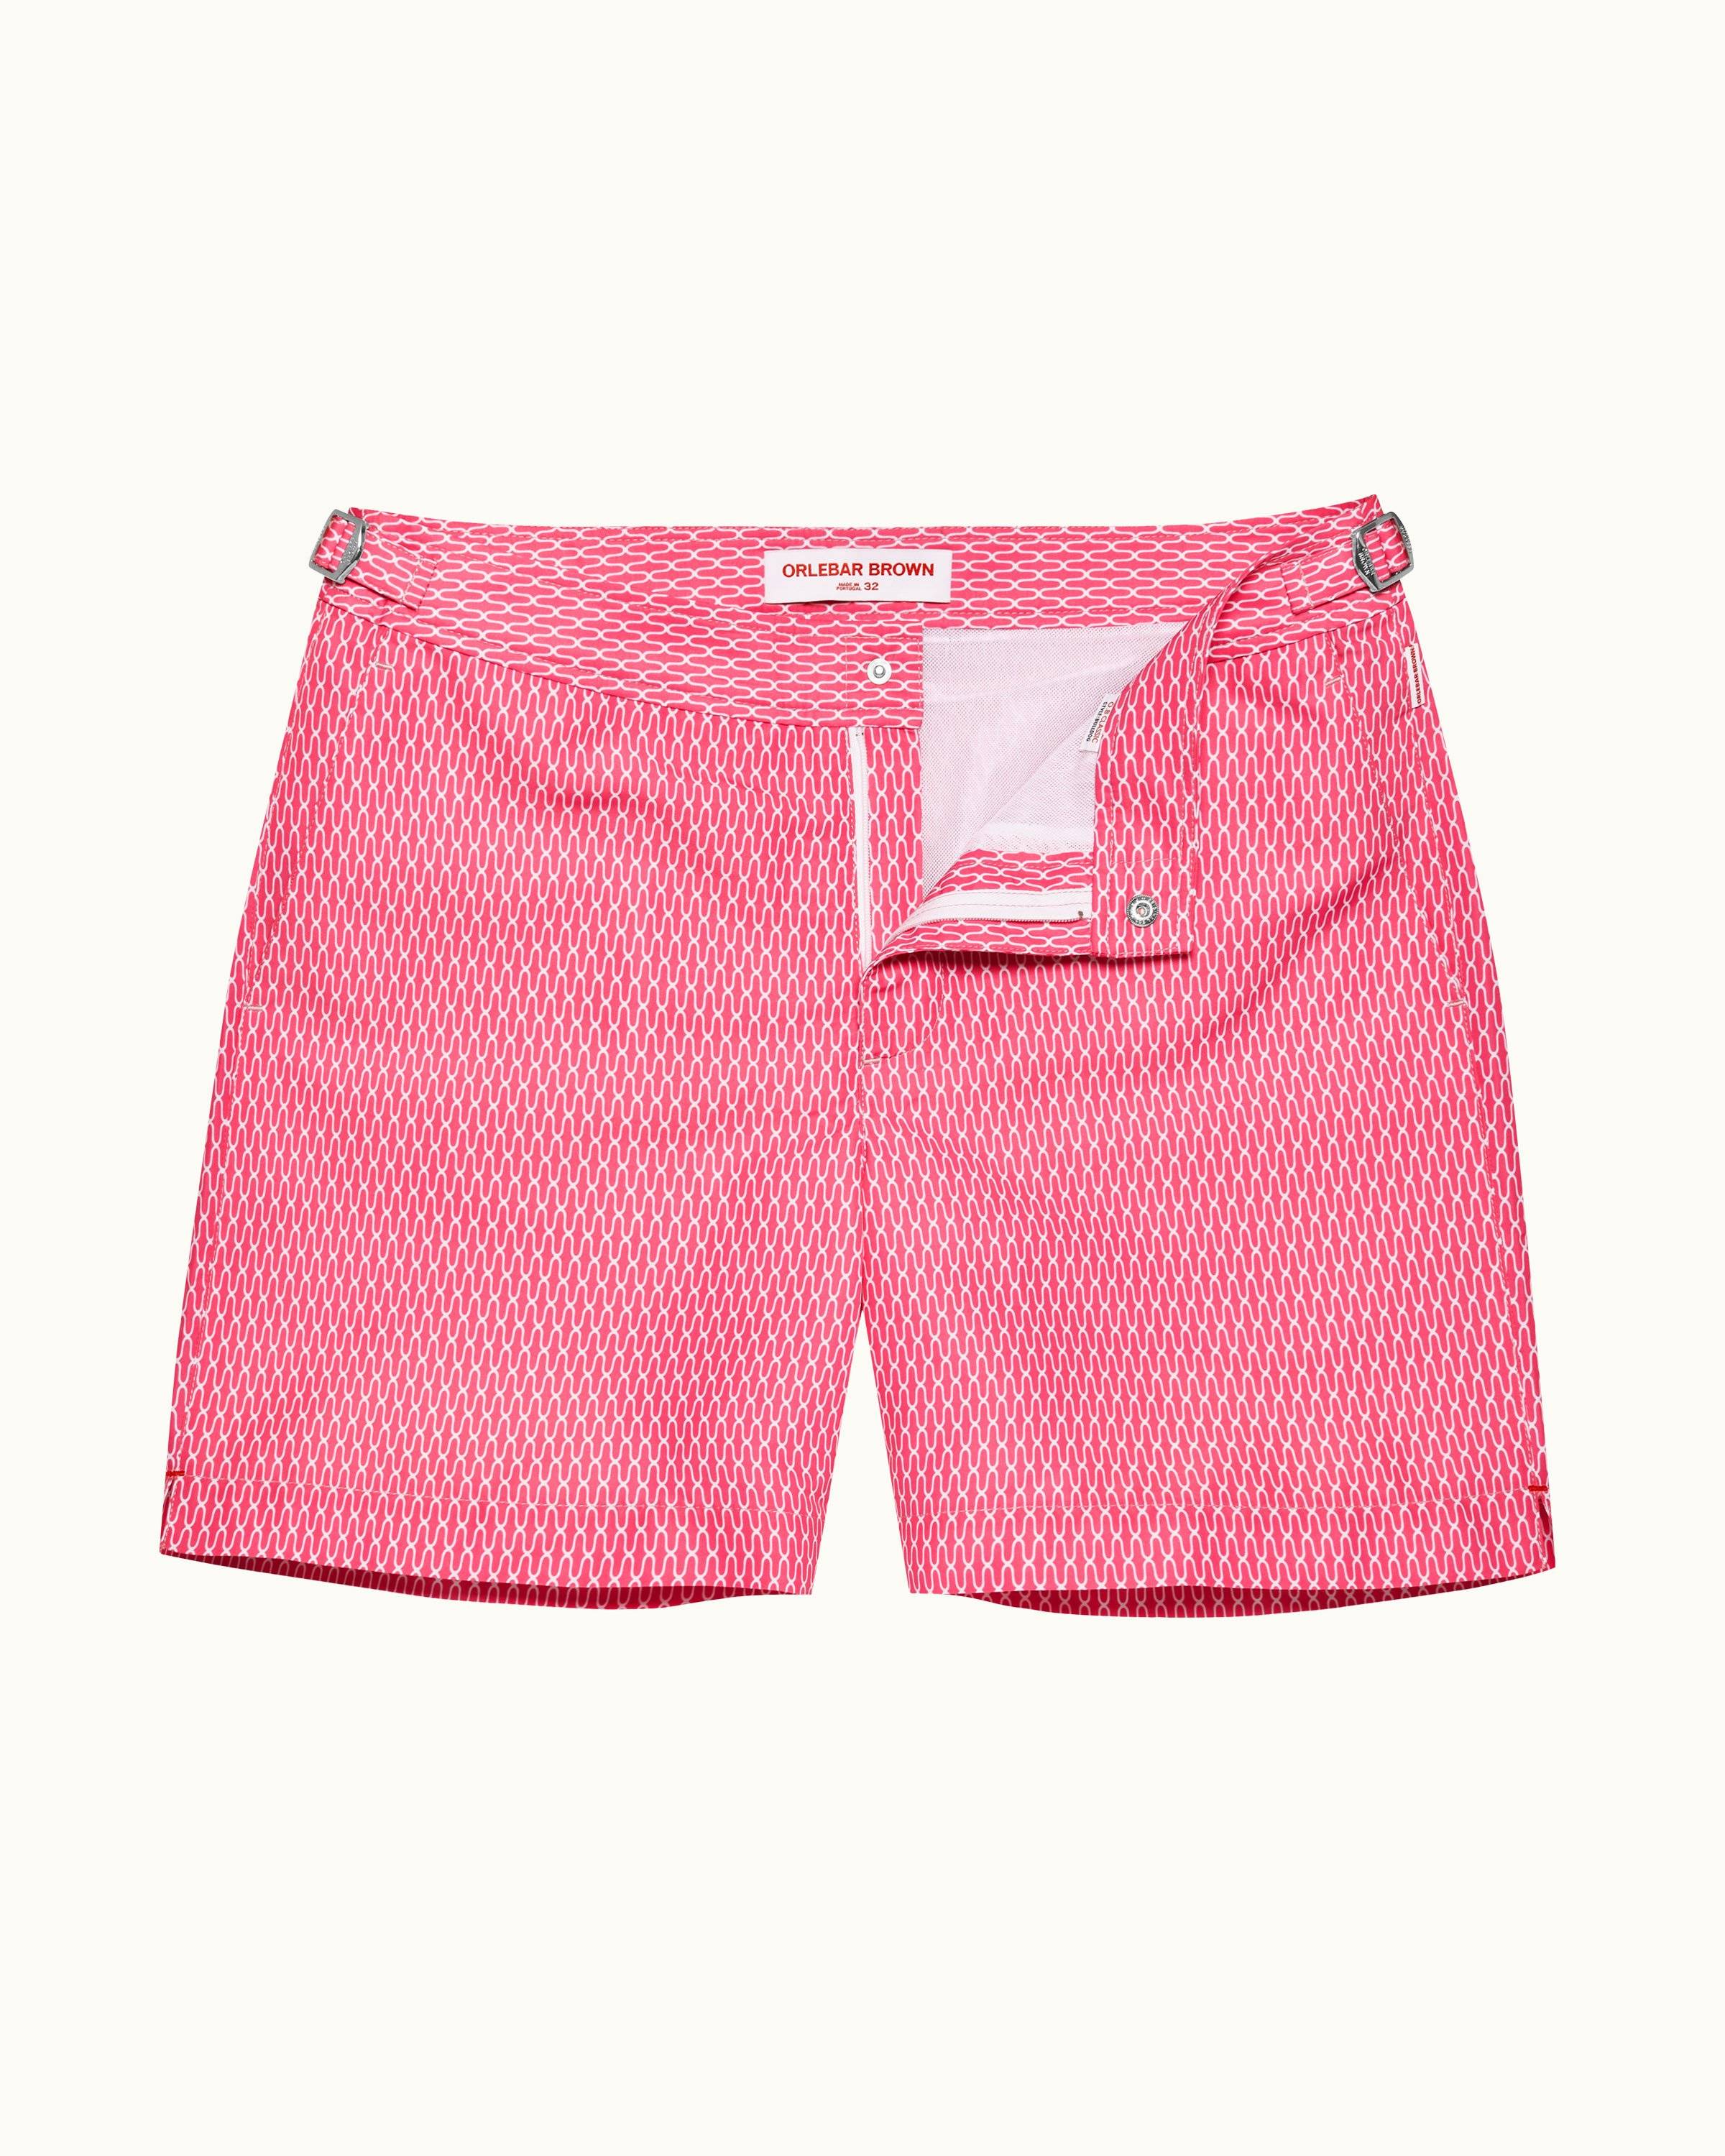 BonetNNM shorts in organic cotton with pointelle and dots – Noa